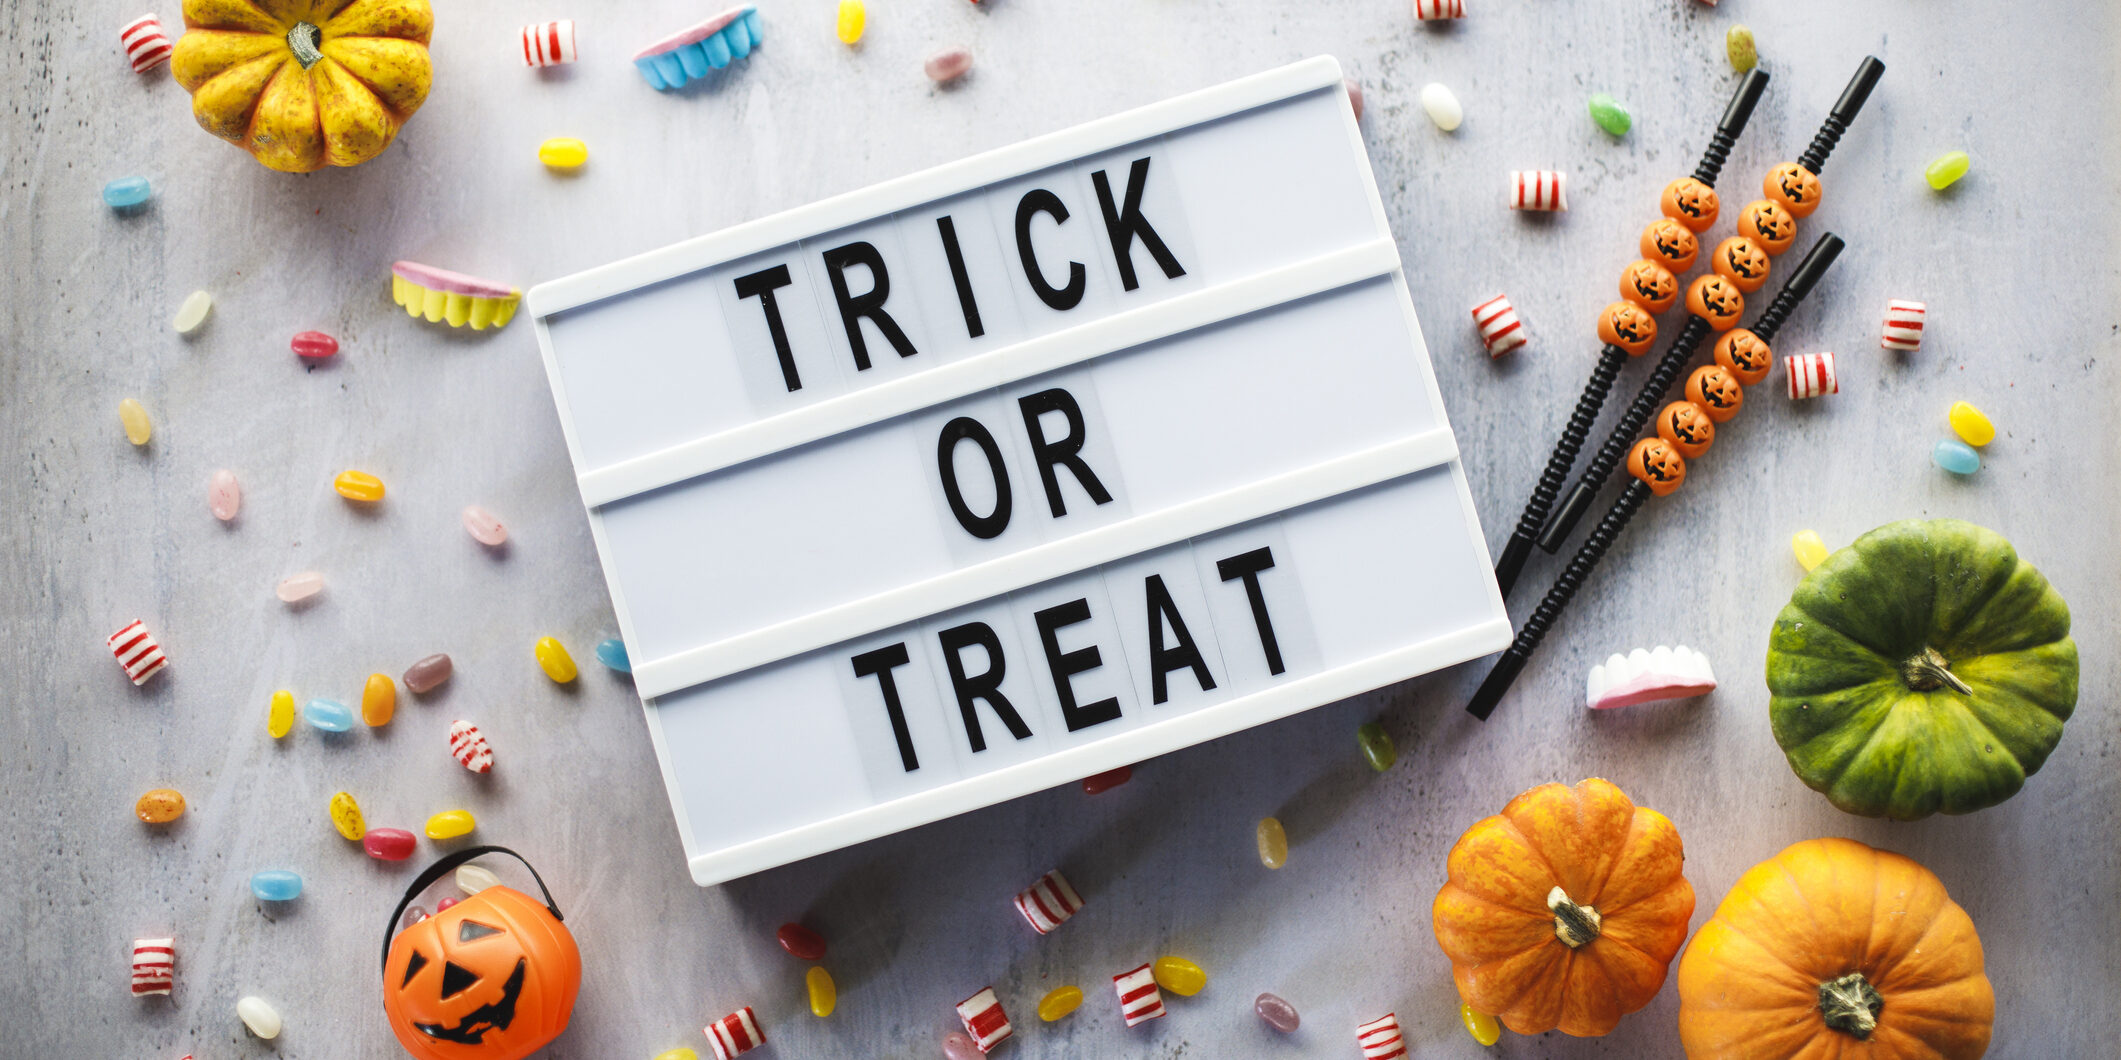 Flat lay of a letter board that says ''trick or treat'', little Jack o' lantern bucket, scattered candy, fun drinking straws and colorful gourds arranged on a white background.